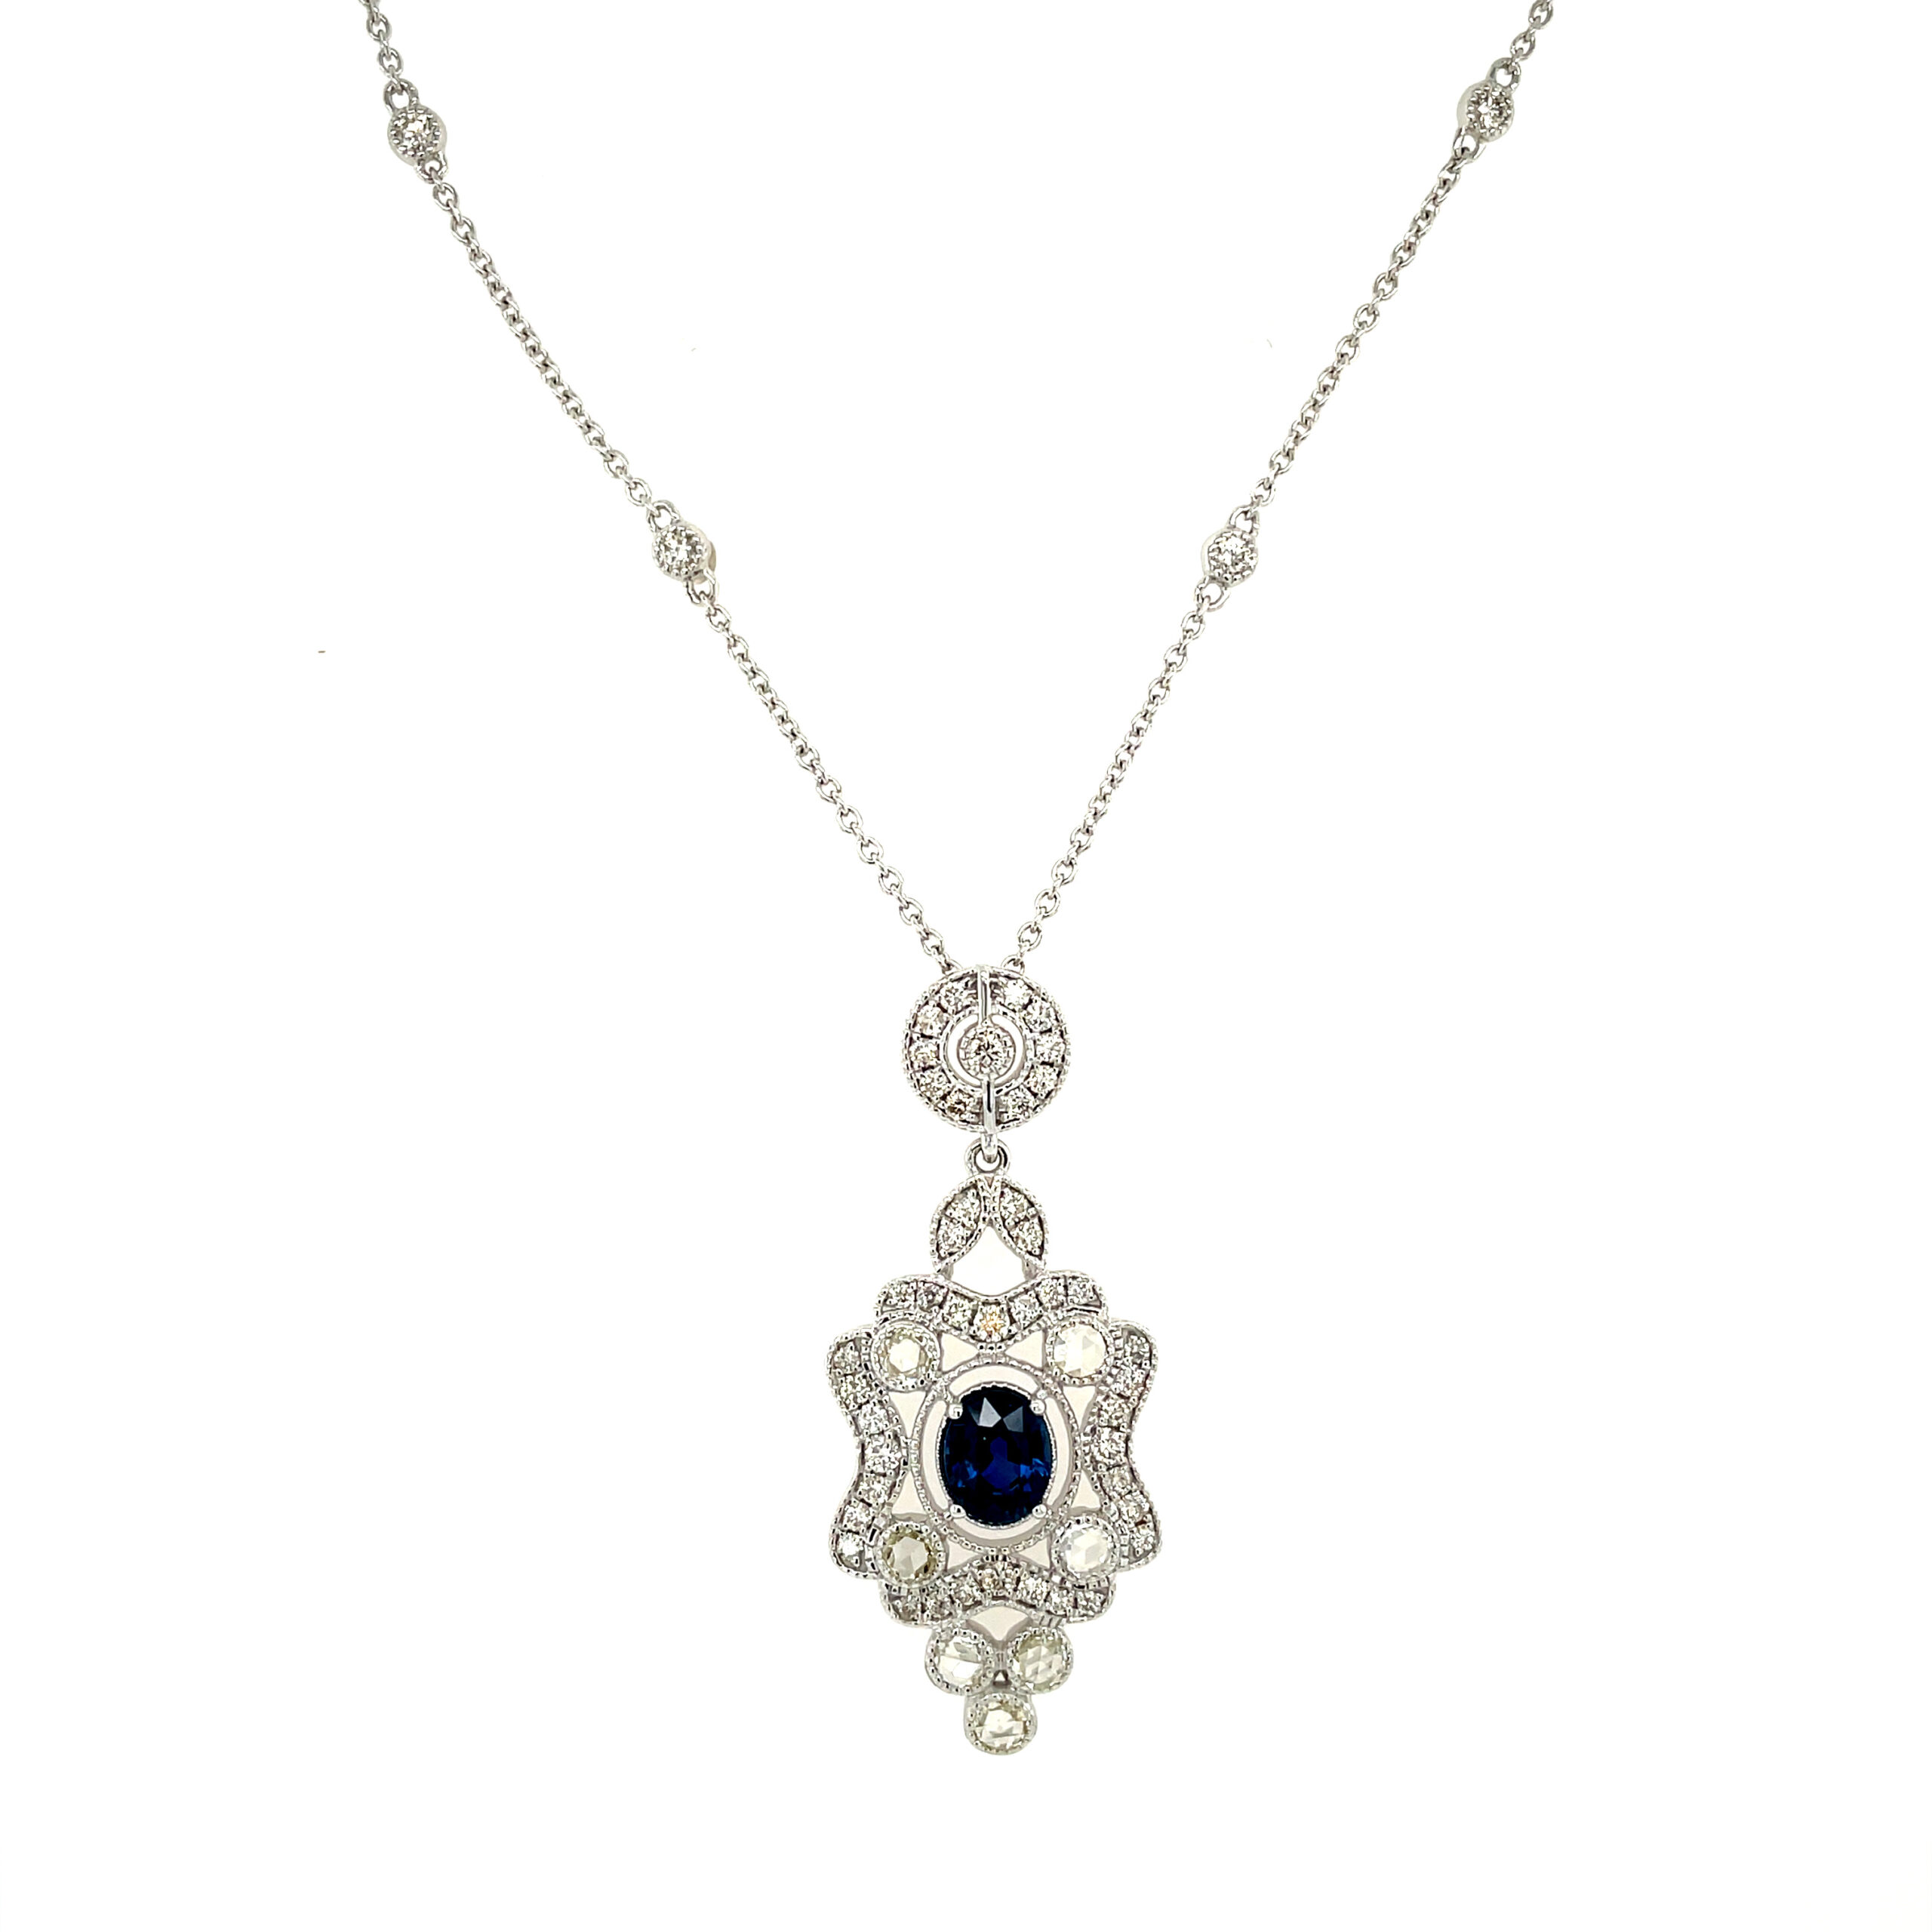 White Gold Antique-Inspired Sapphire Necklace